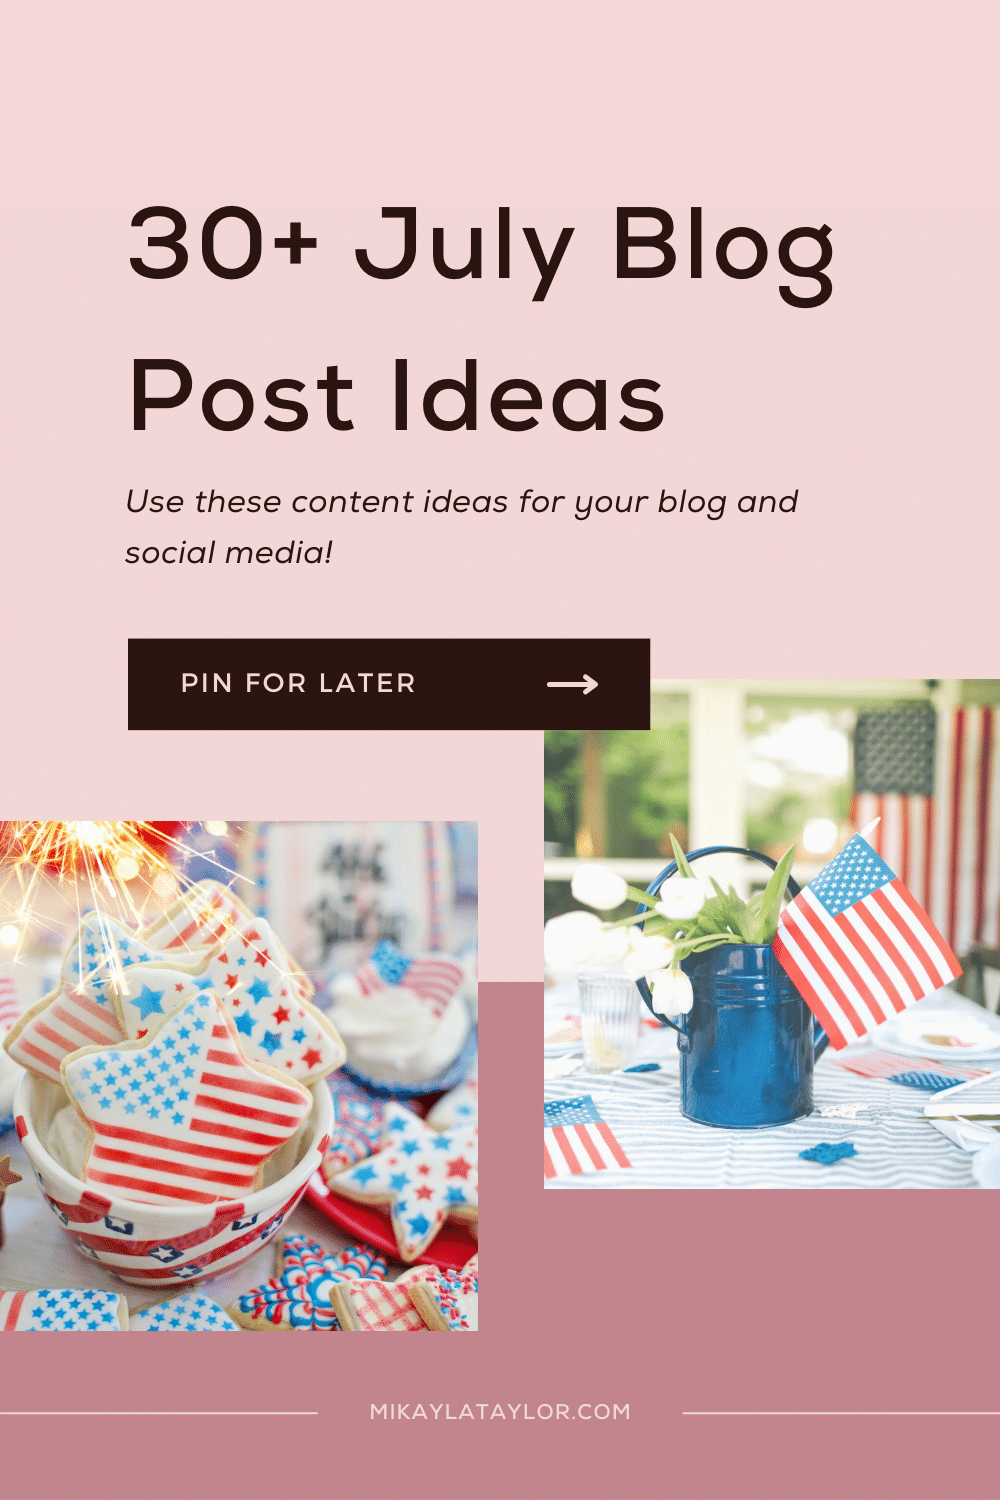 30+ July Blog Post Ideas - use these ideas for your business mikaylataylor.com